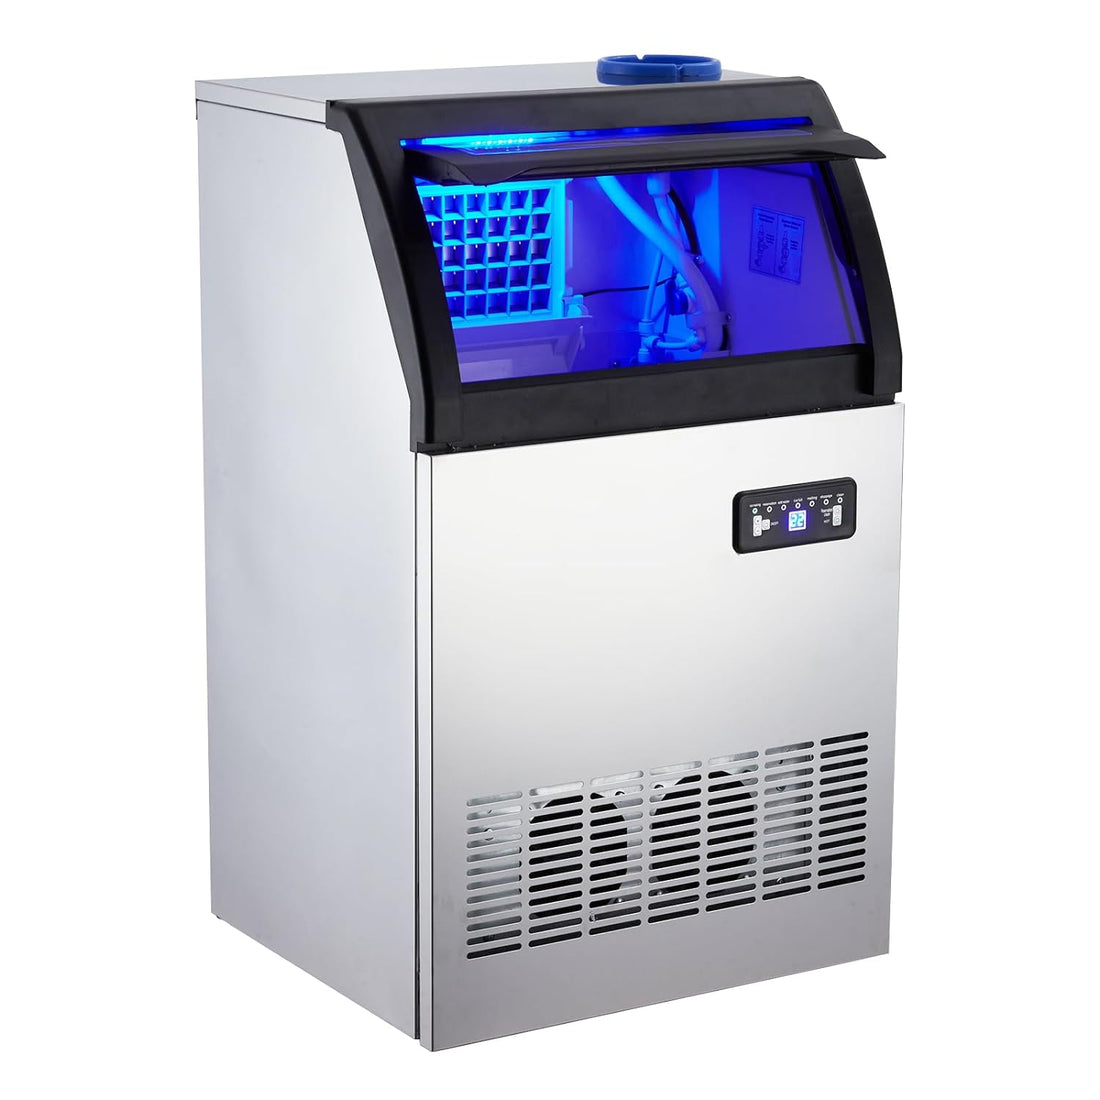 GARVEE Commercial Ice Maker, 155 Lbs/24H, 33 Lbs Storage, Stainless Steel, LED Display, Undercounter, Freestanding for Bars, Cafes, Businesses